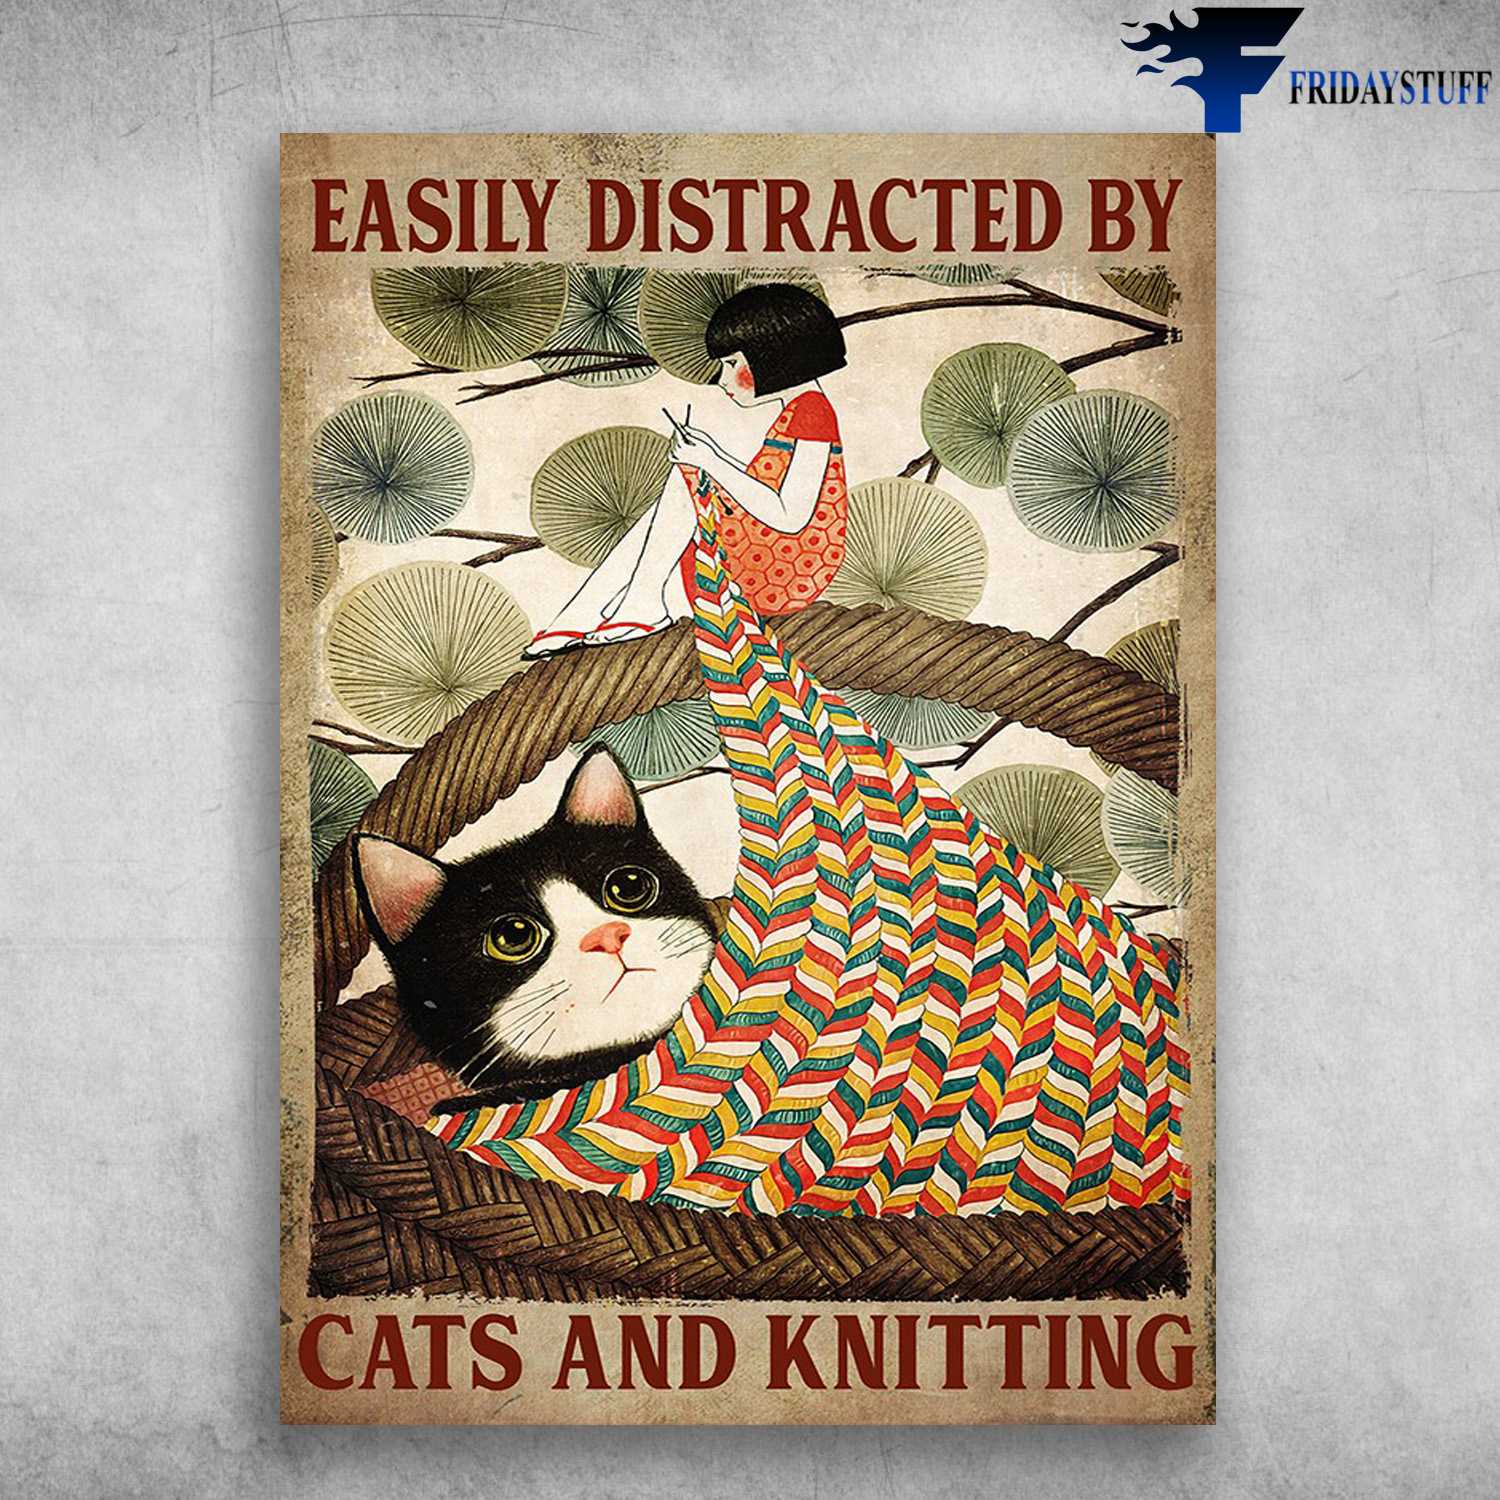 Tuxedo Cat, Knitting Girl - Easily Distracted By, Cats And Knitting